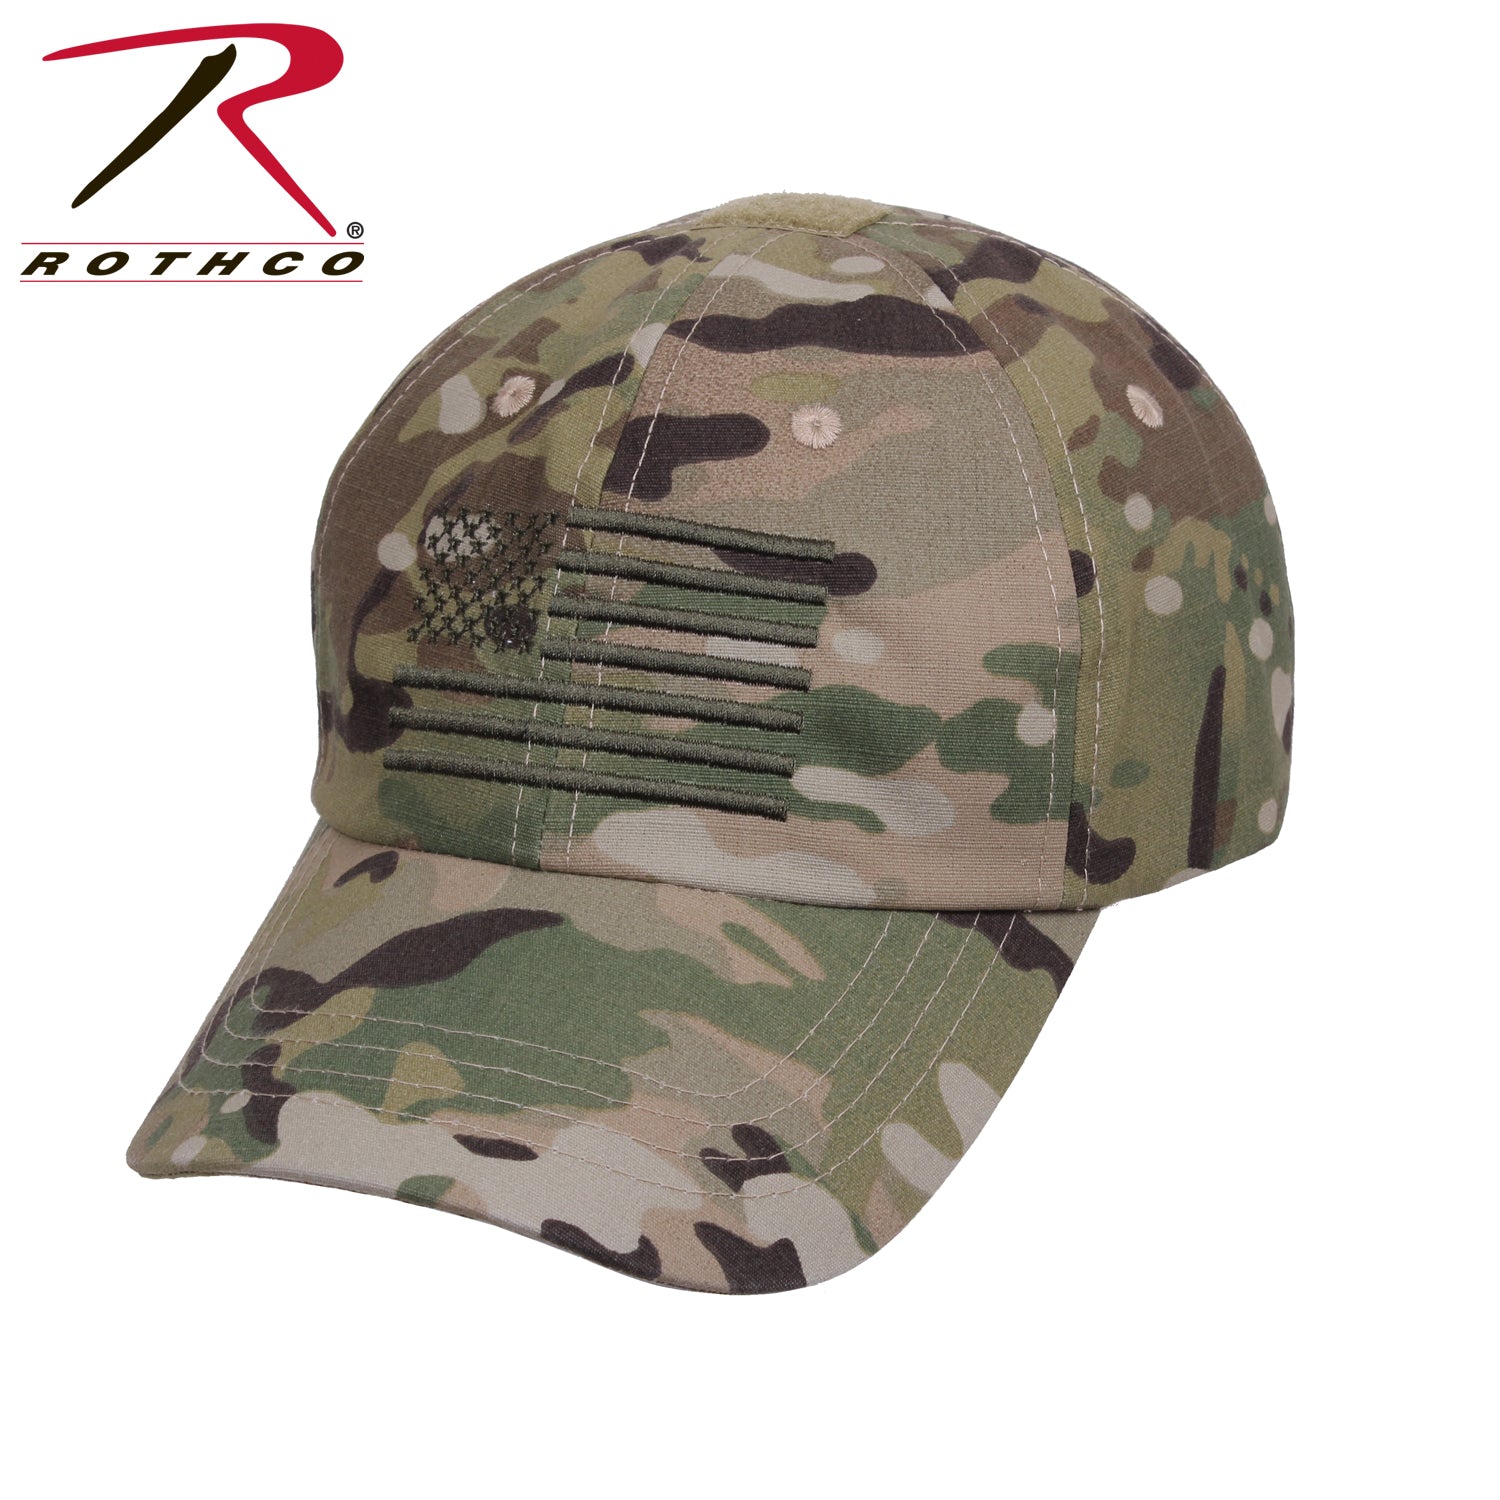 Rothco Tactical Operator Cap With US Flag - Tactical Choice Plus